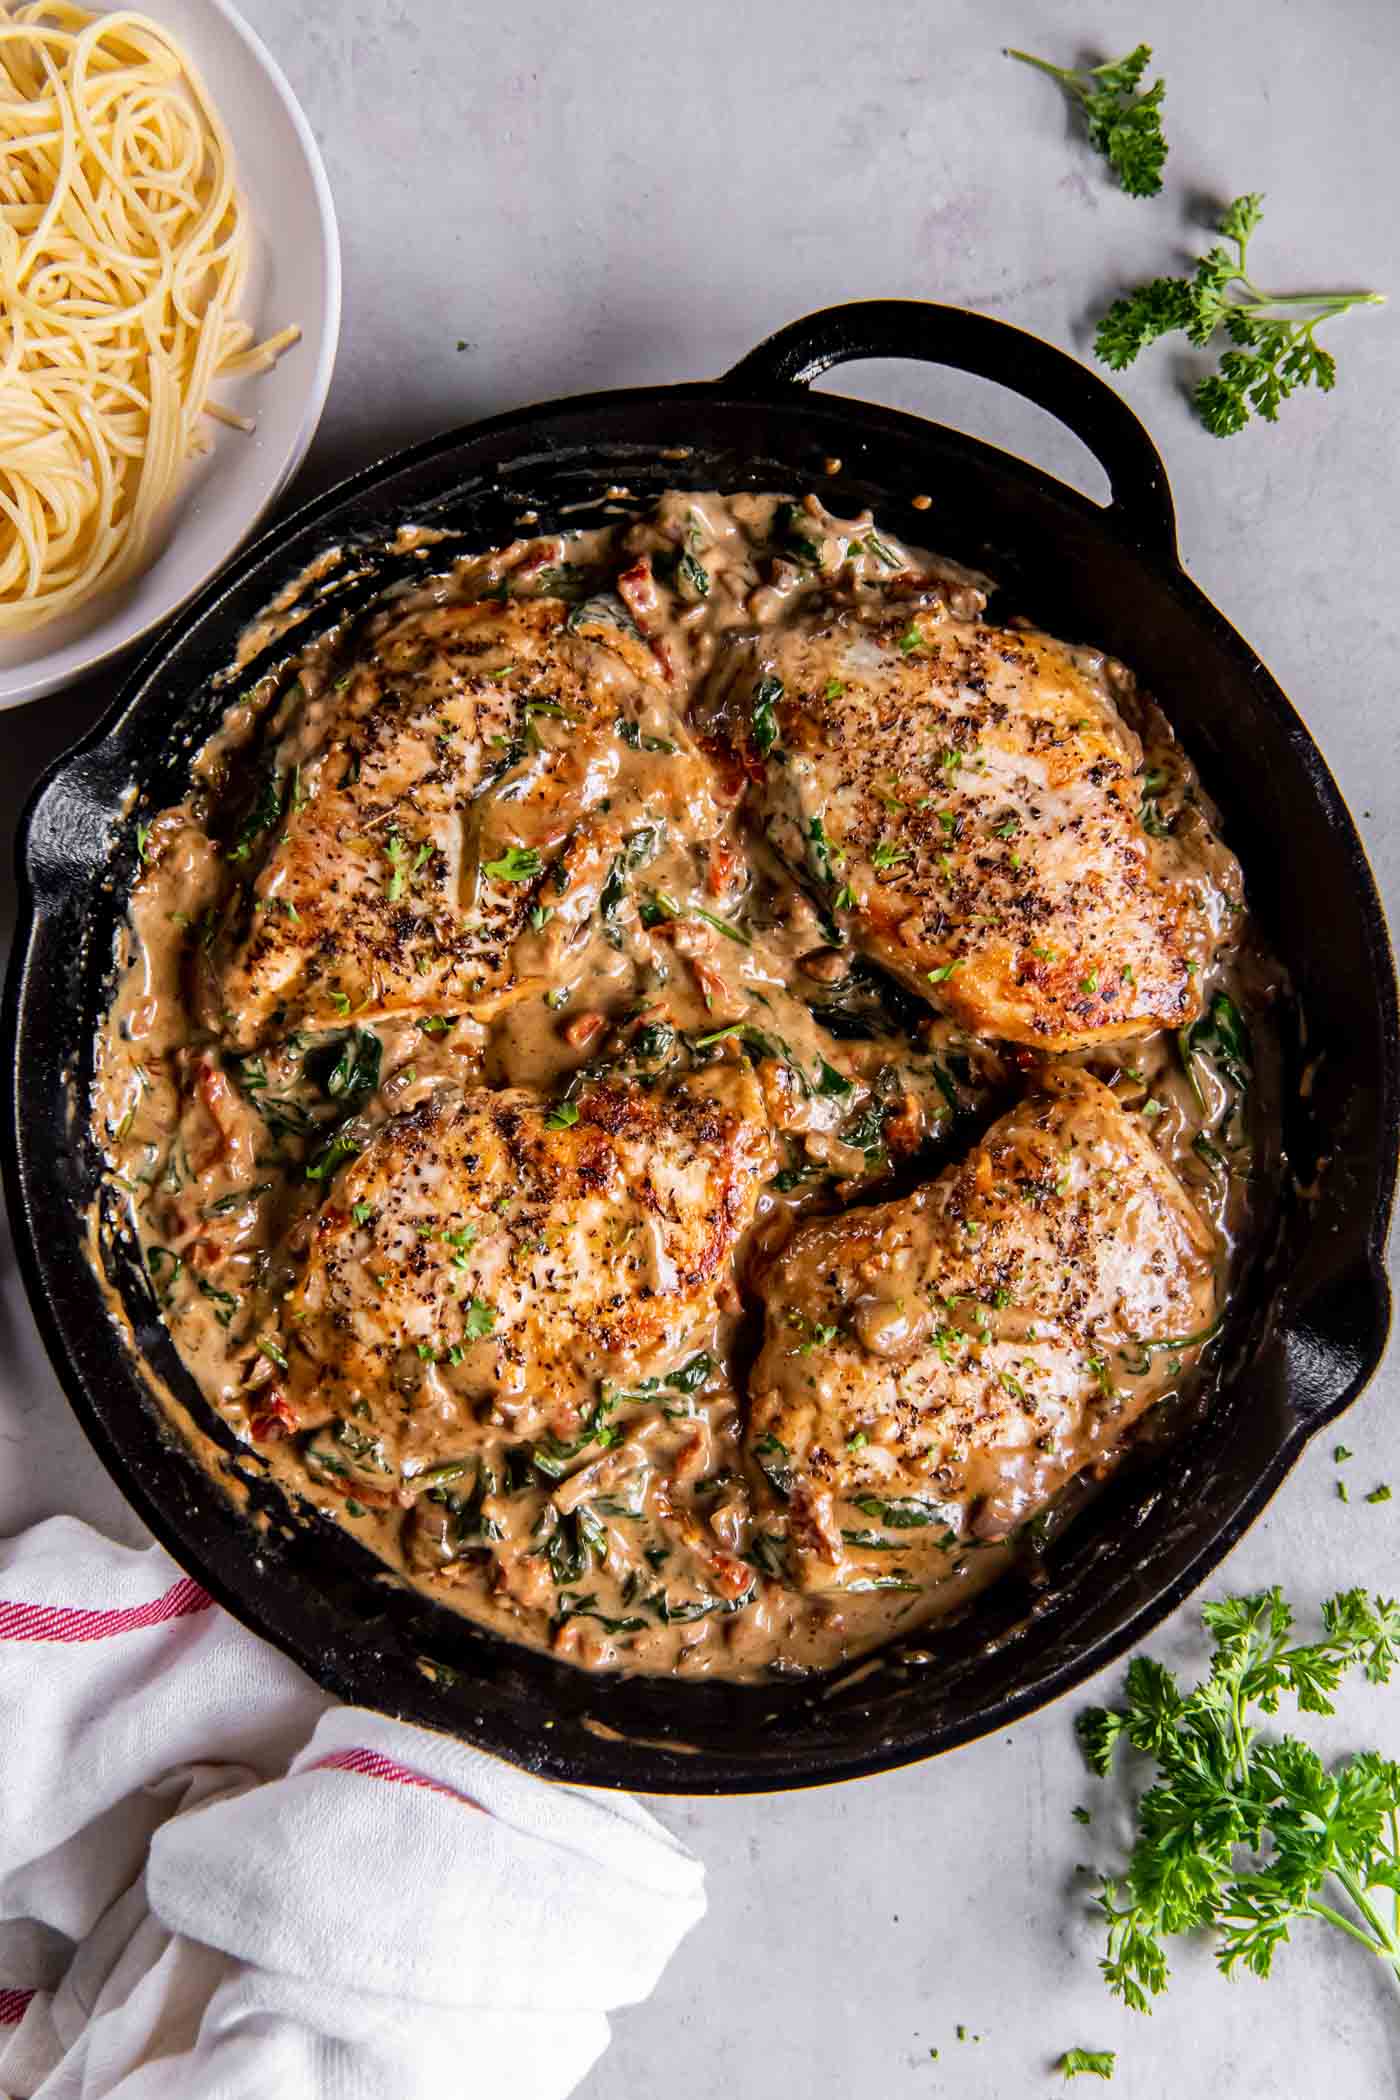 Four chicken breasts with creamy Tuscan sauce in a cast iron skillet.